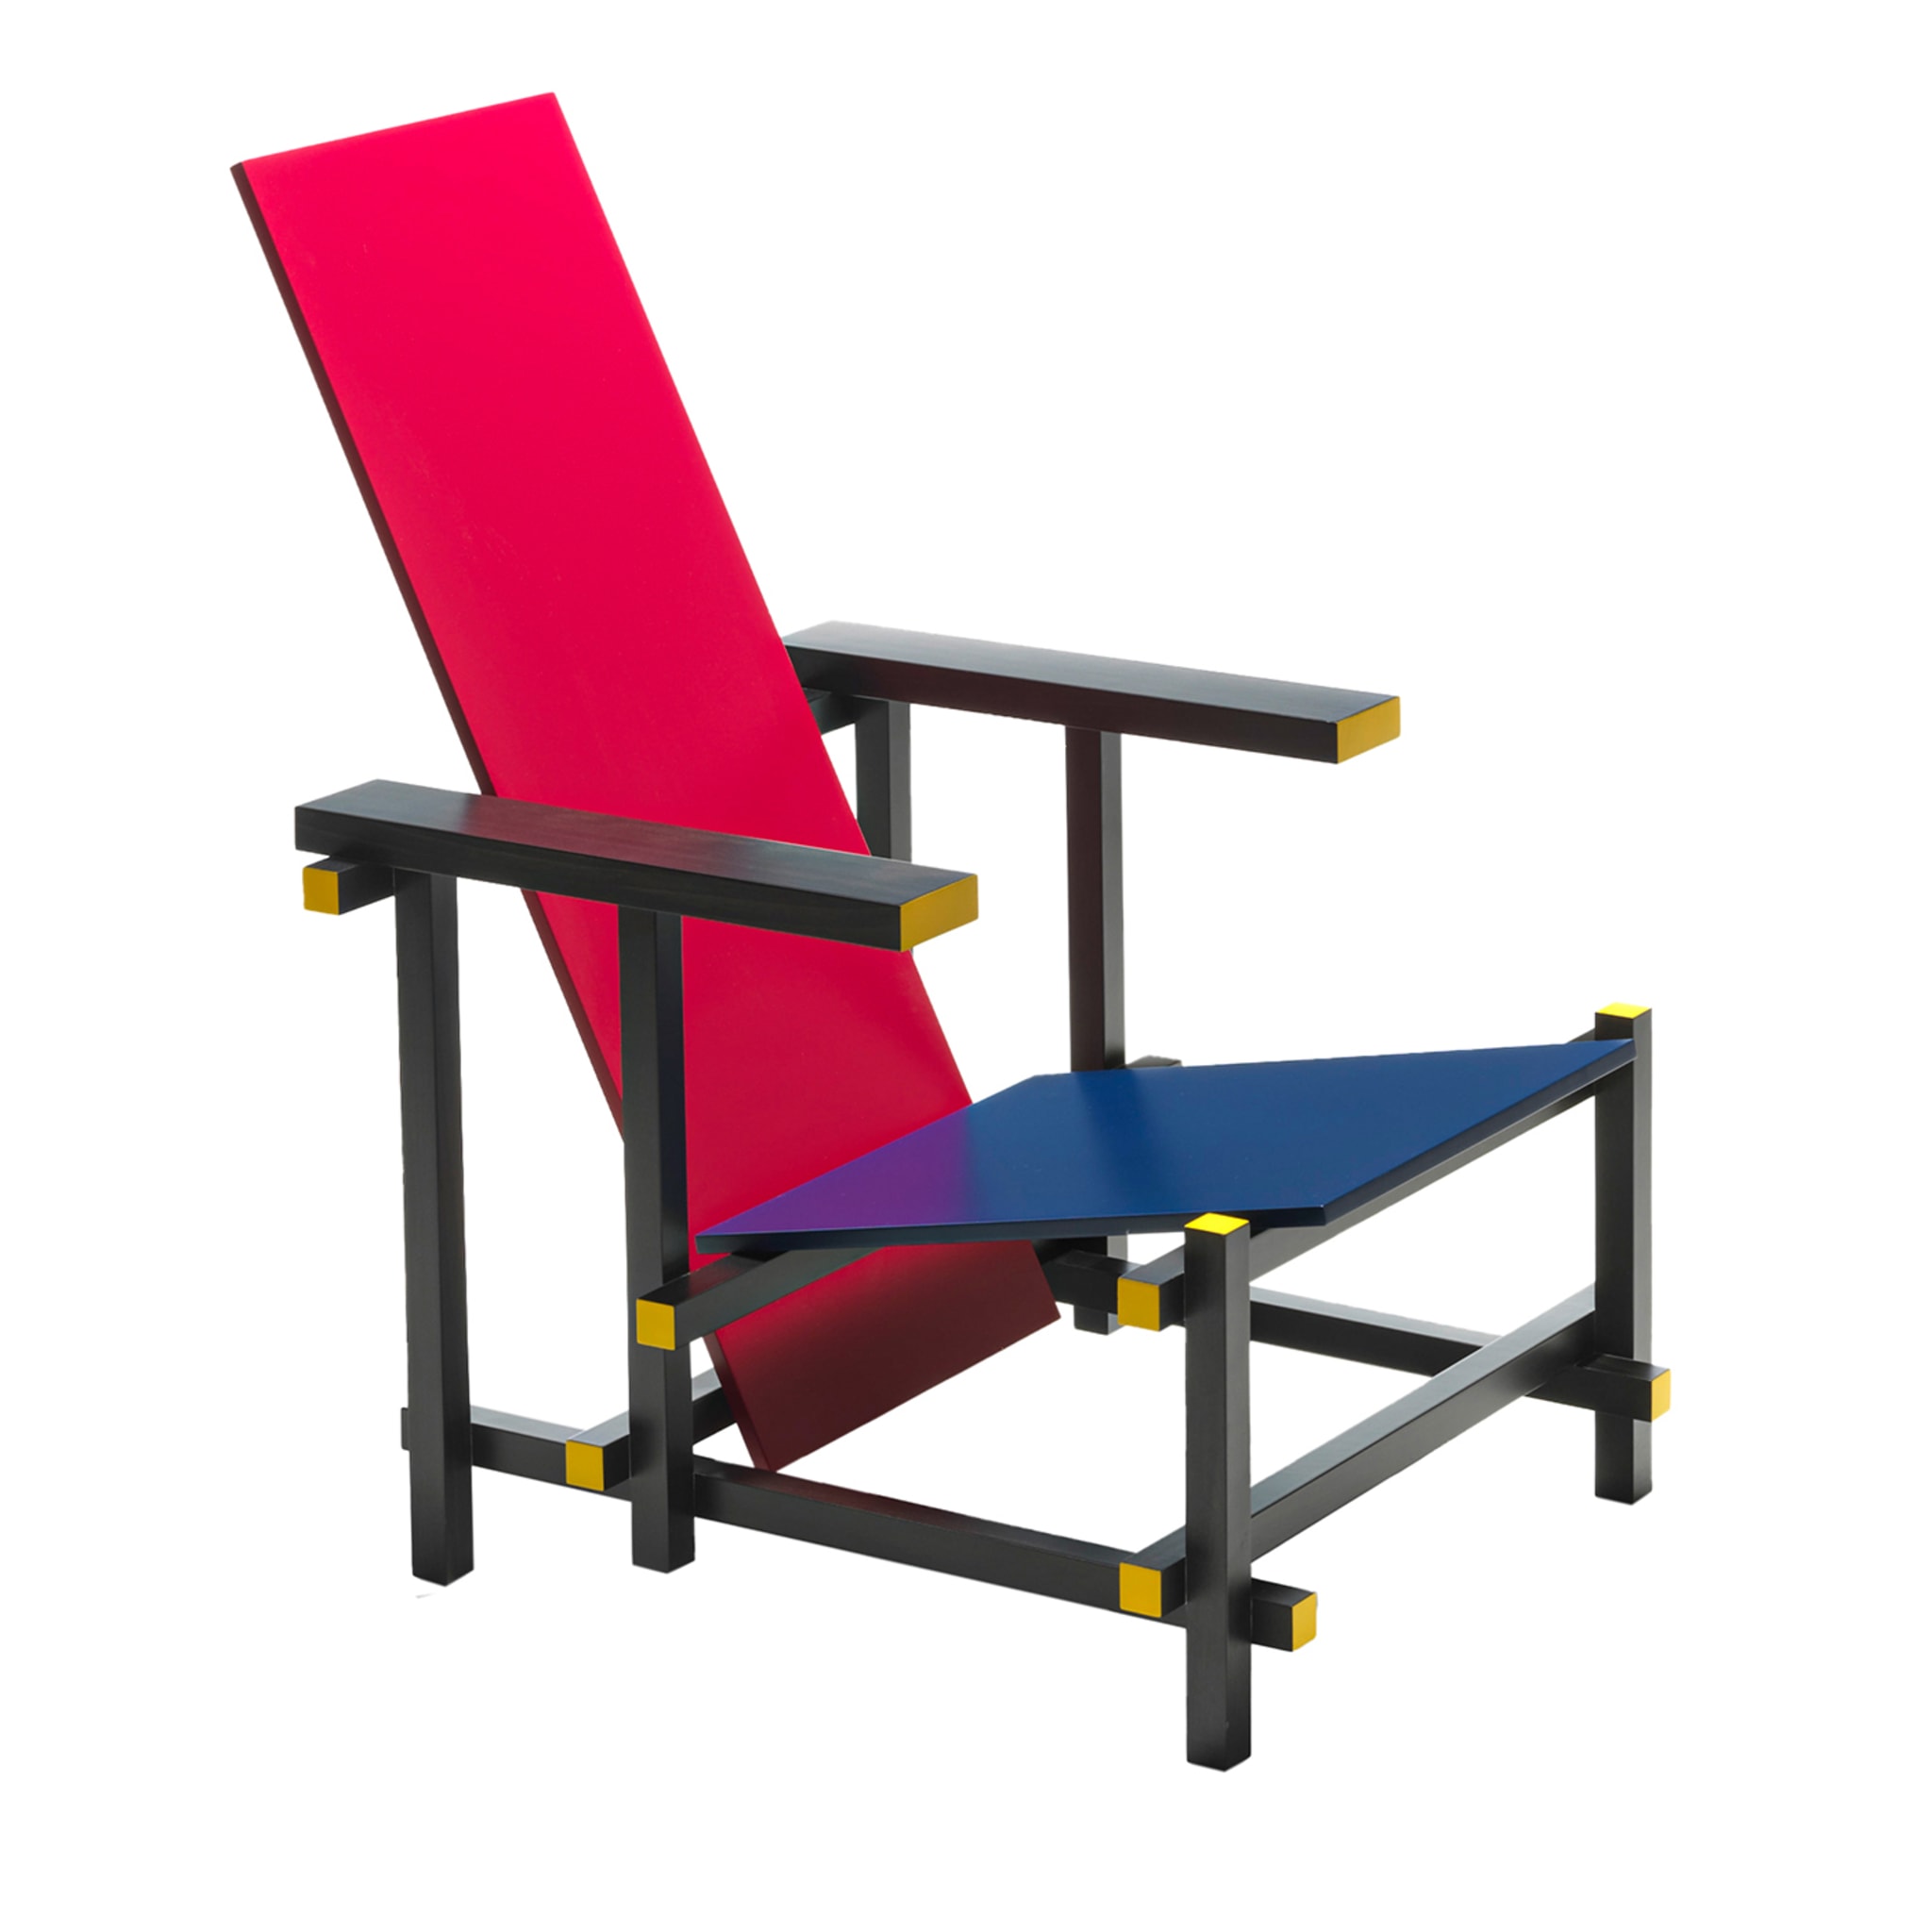 Red & Blue by Gerrit T. Rietveld - Main view